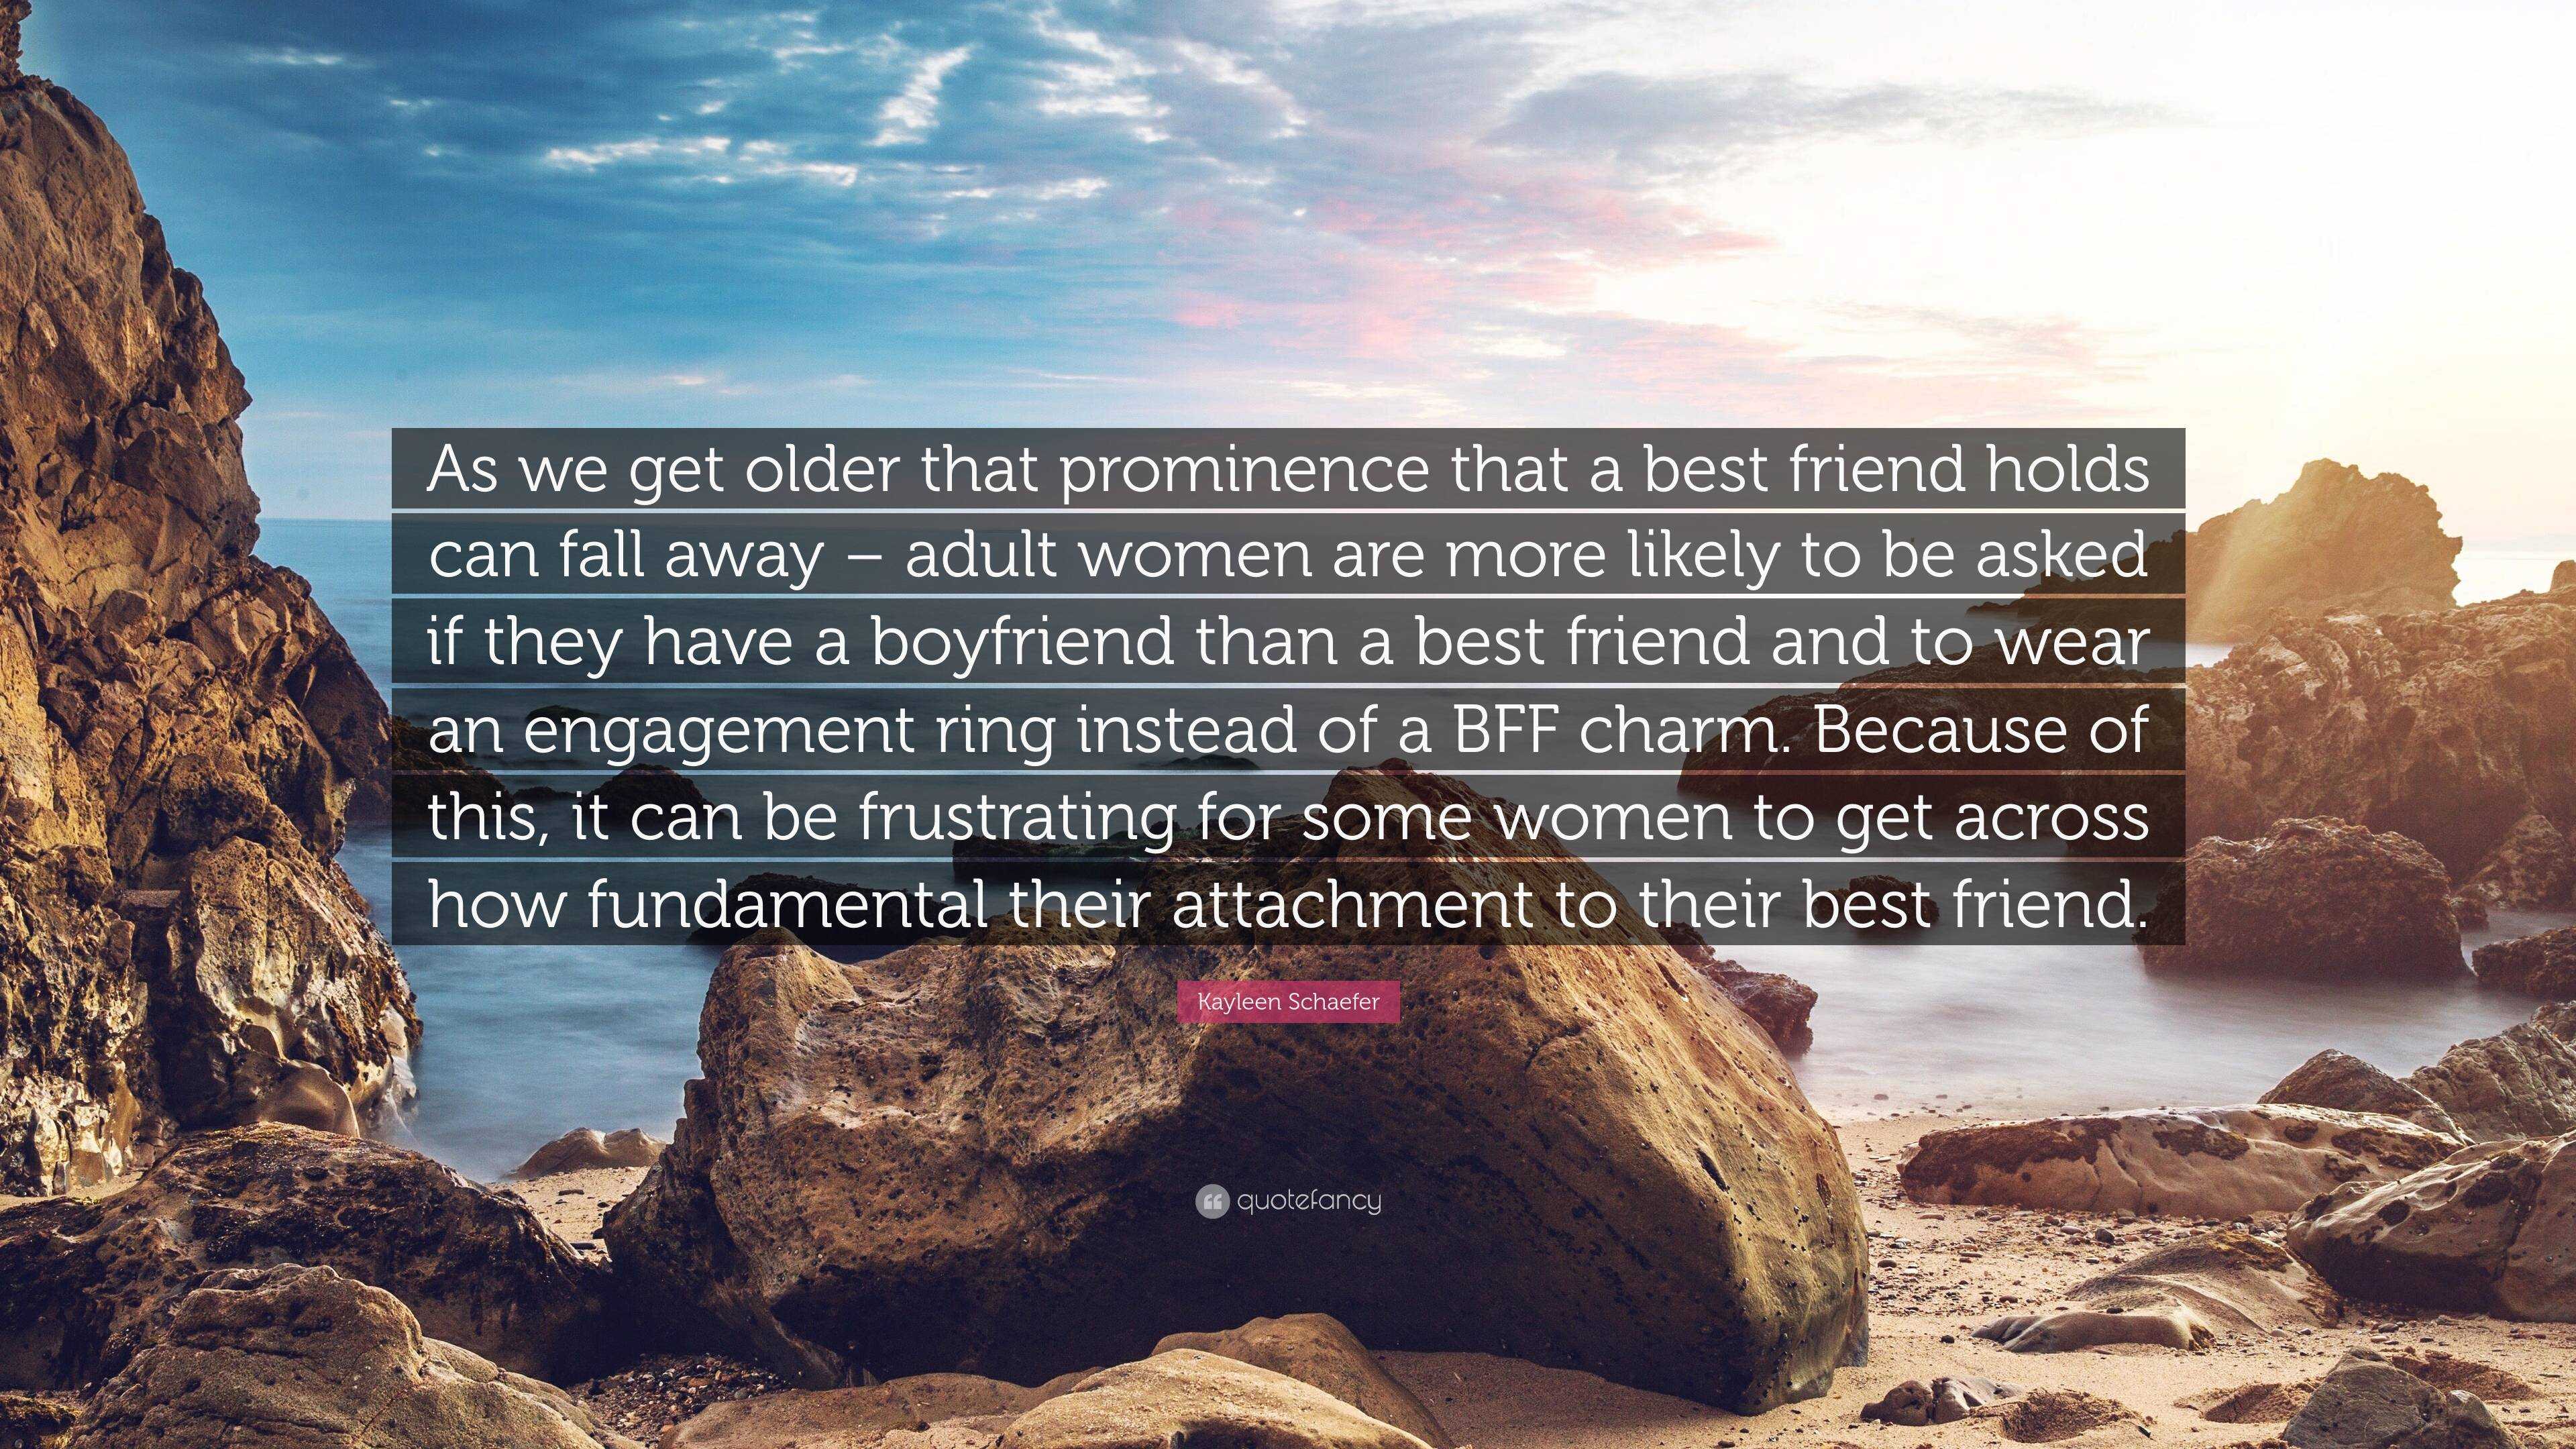 Kayleen Schaefer Quote: “As we get older that prominence that a best ...